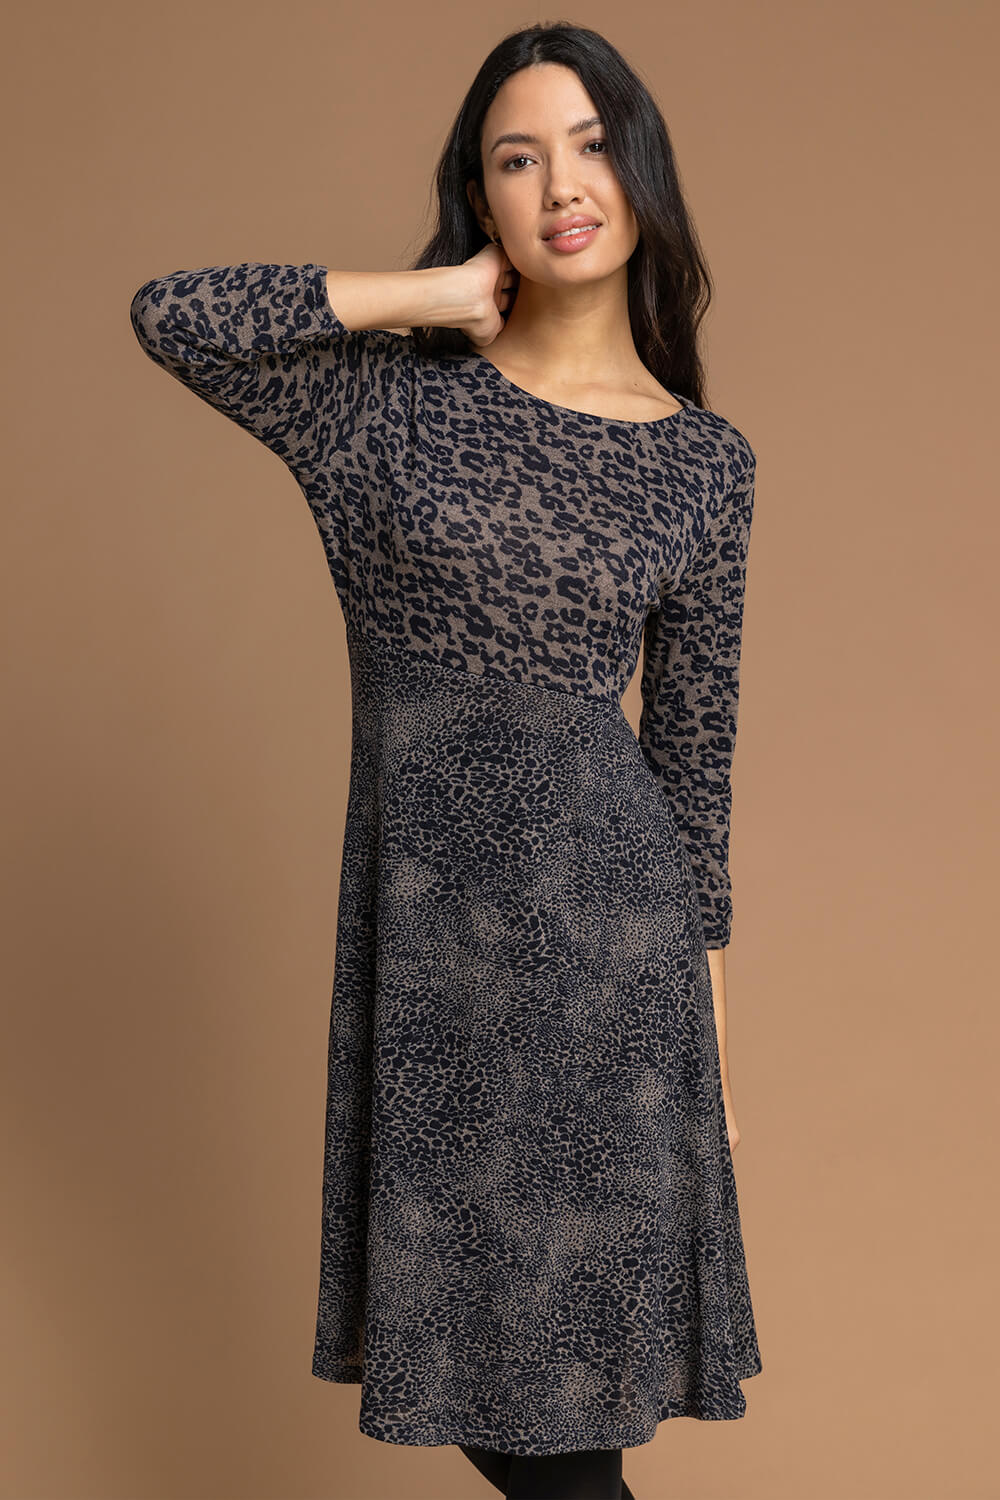 Contrast Animal Fit & Flare Dress